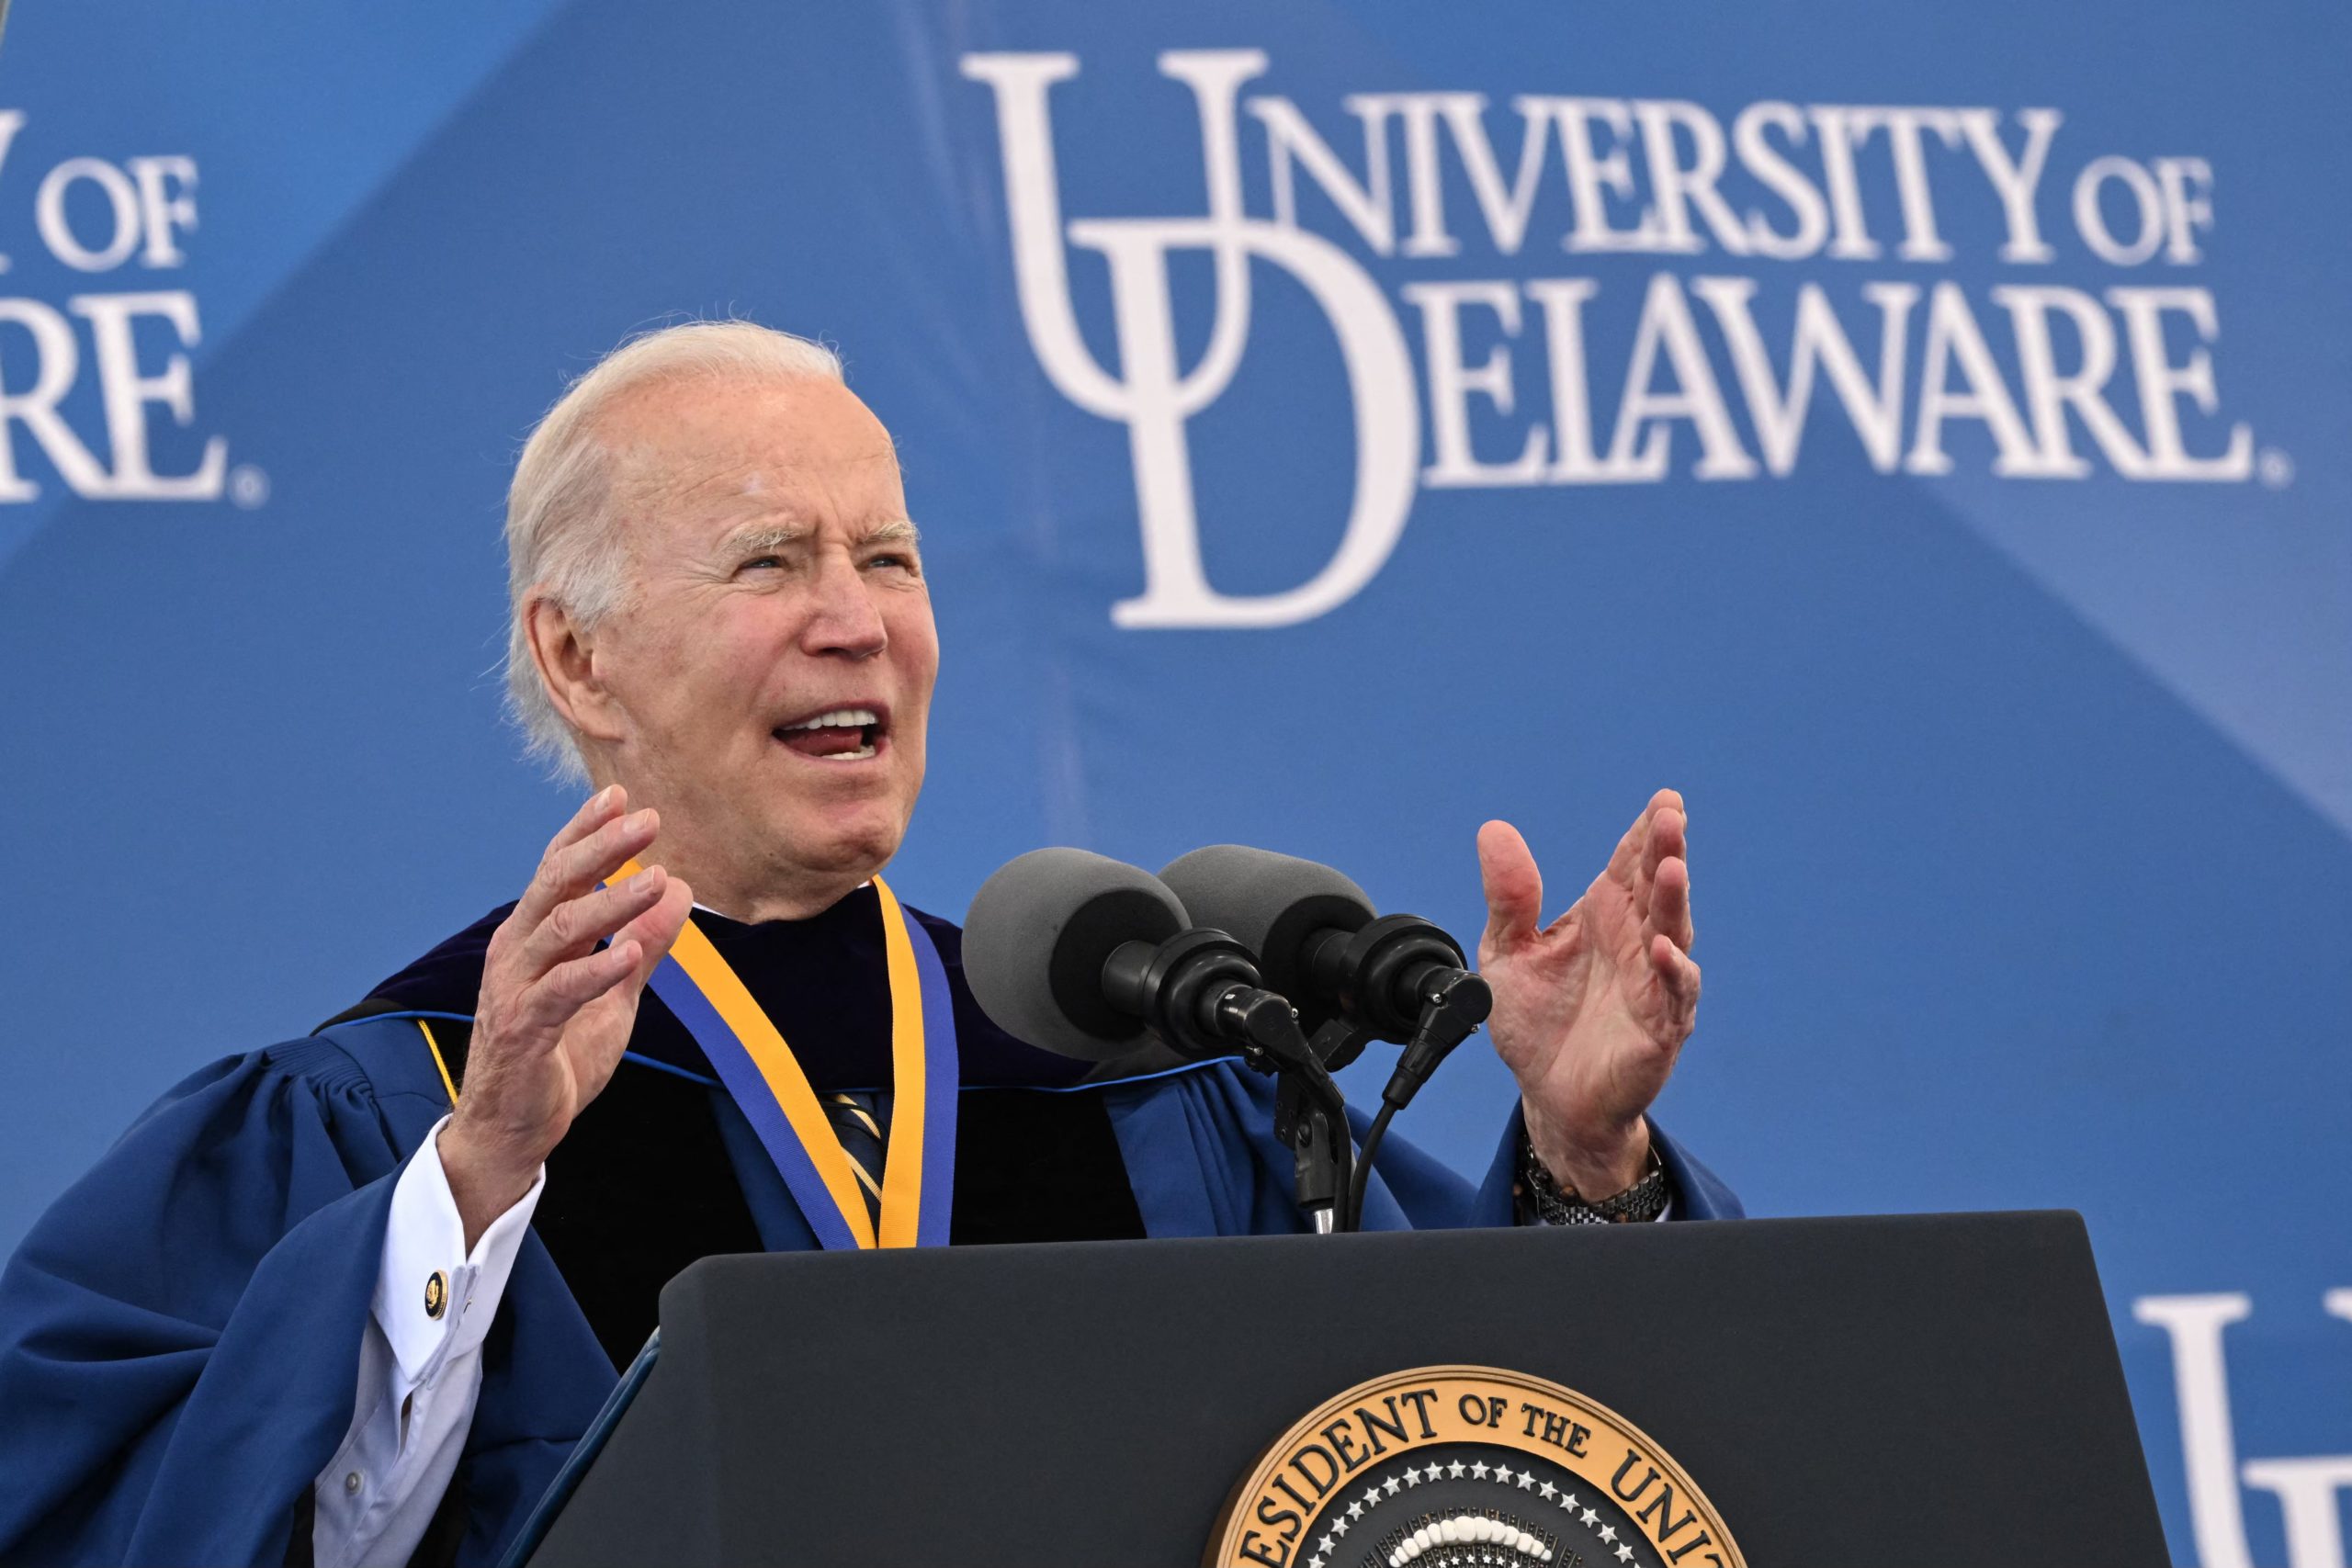 US President Joe Biden delivers the commencement address for his alma mater, the University of Delaware, at Delaware Stadium, in Newark, Delaware, on May 28, 2022. 